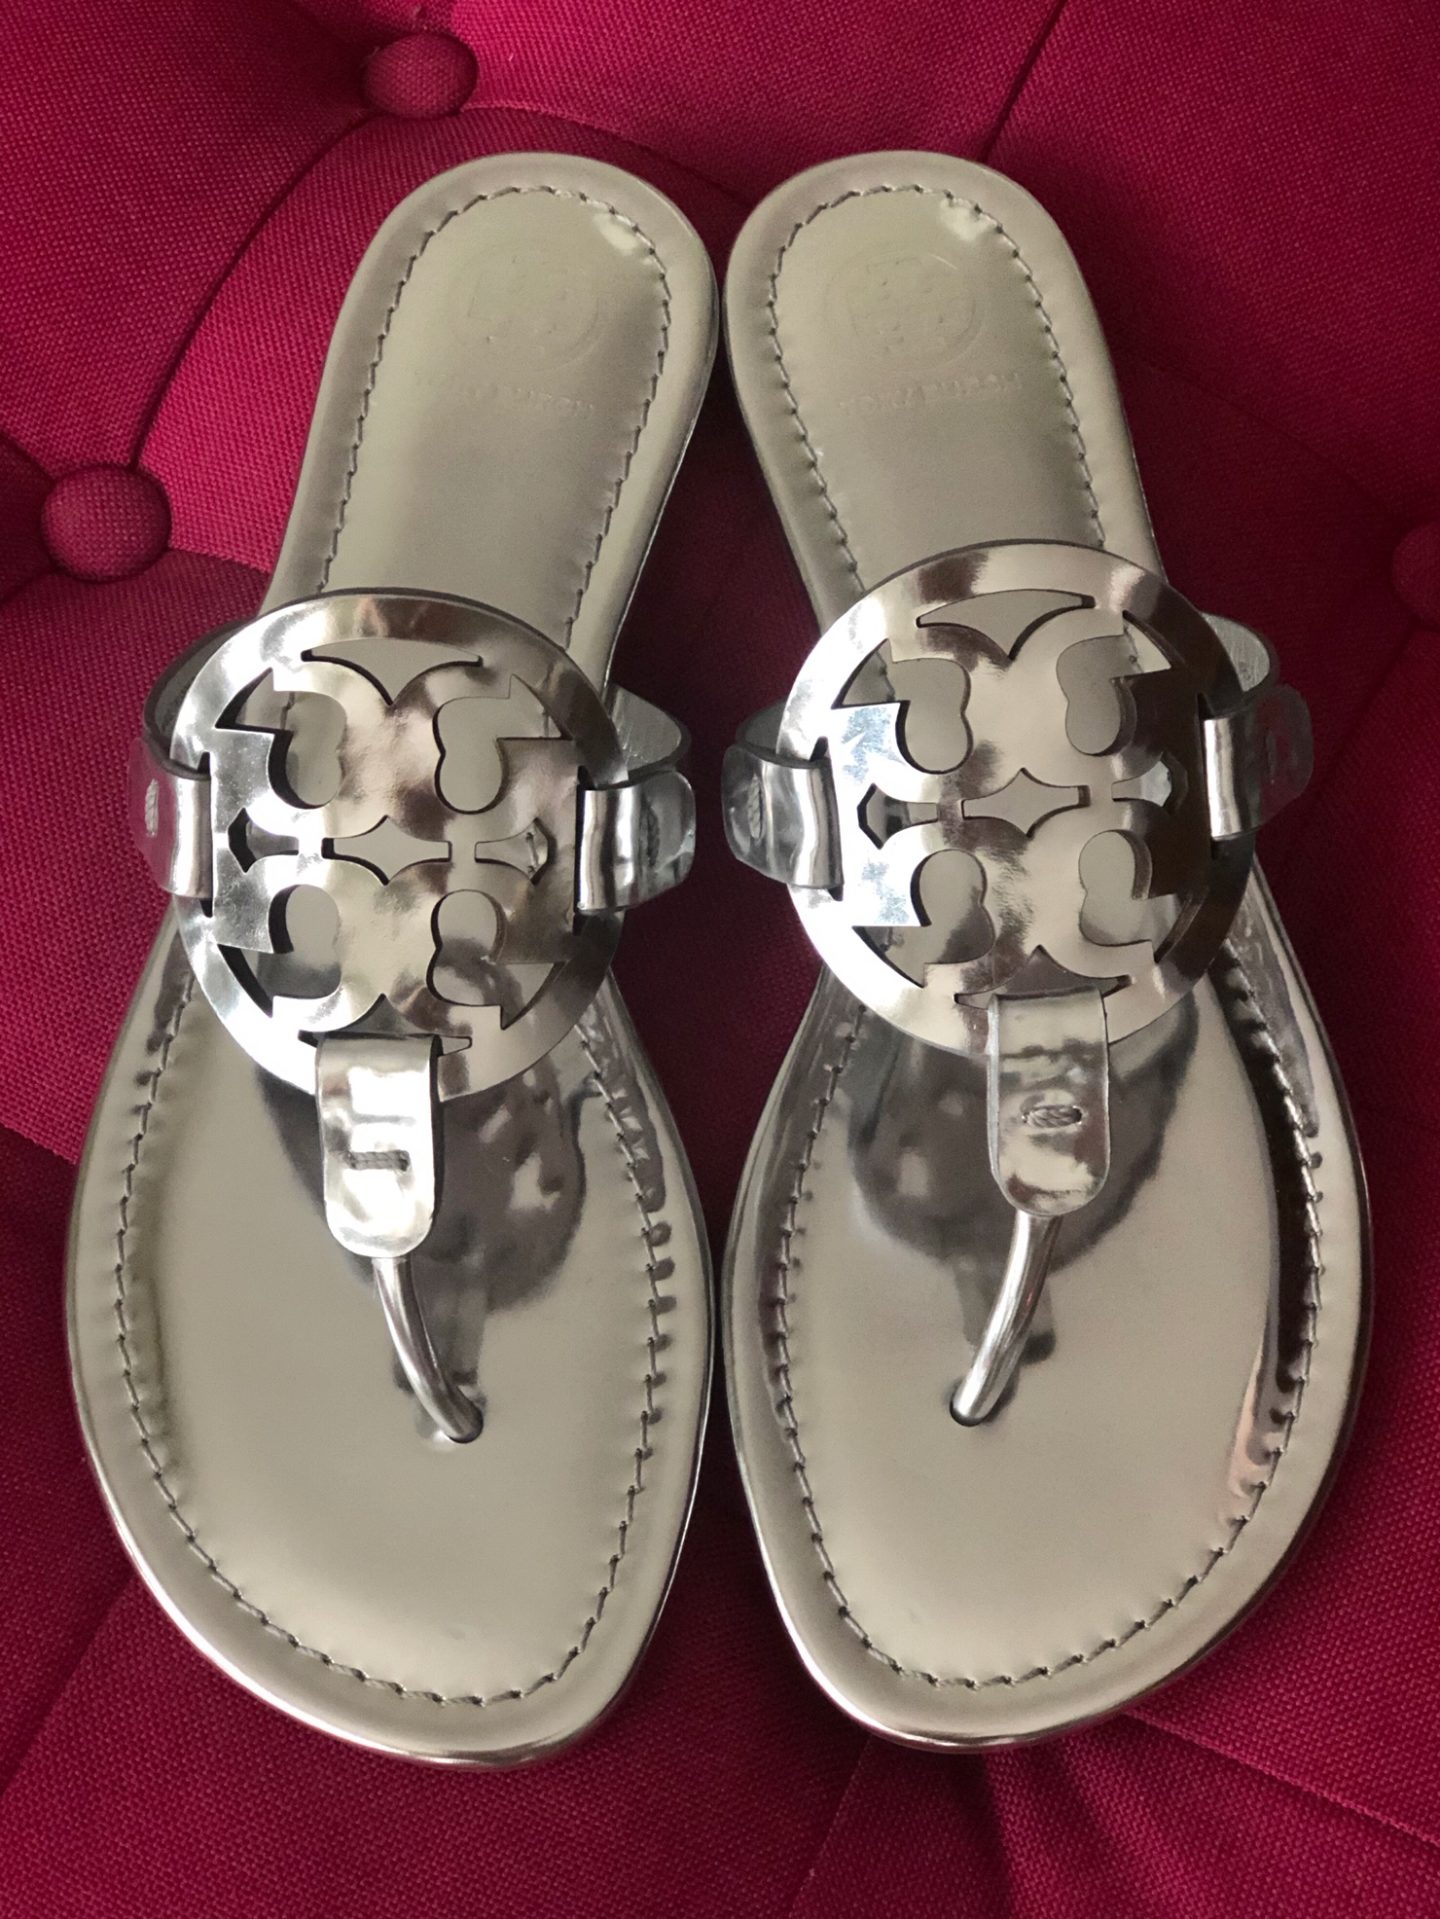 25% Off Tory Burch Miller Promo! - The Double Take Girls